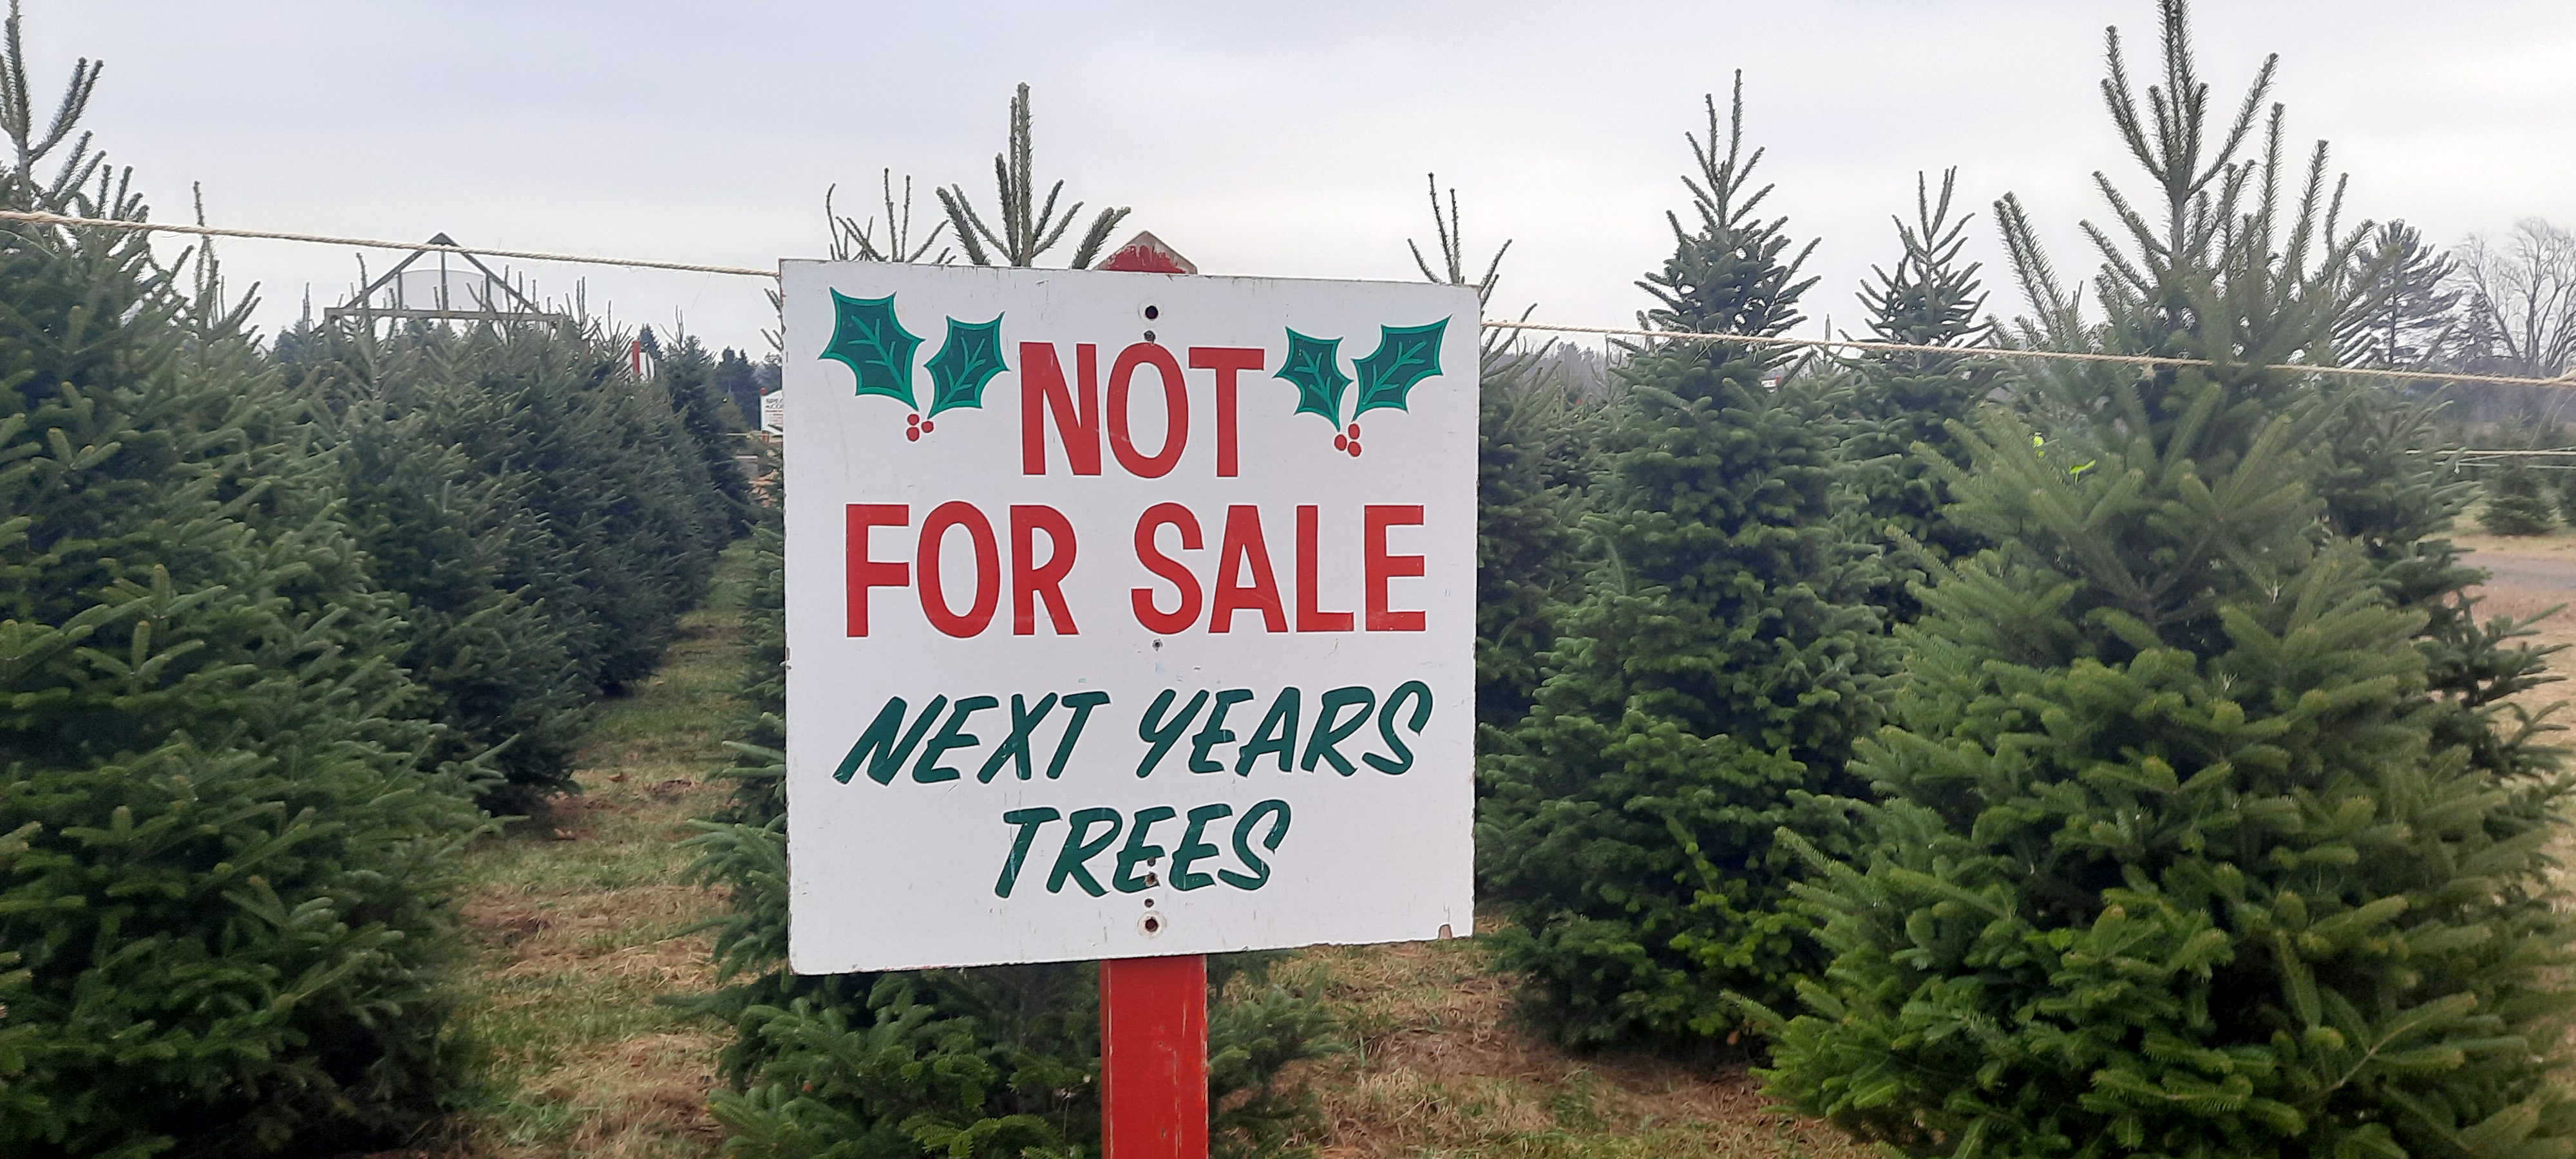 A sign placed in front of many Christmas trees that says "Not for sale, next year's trees."